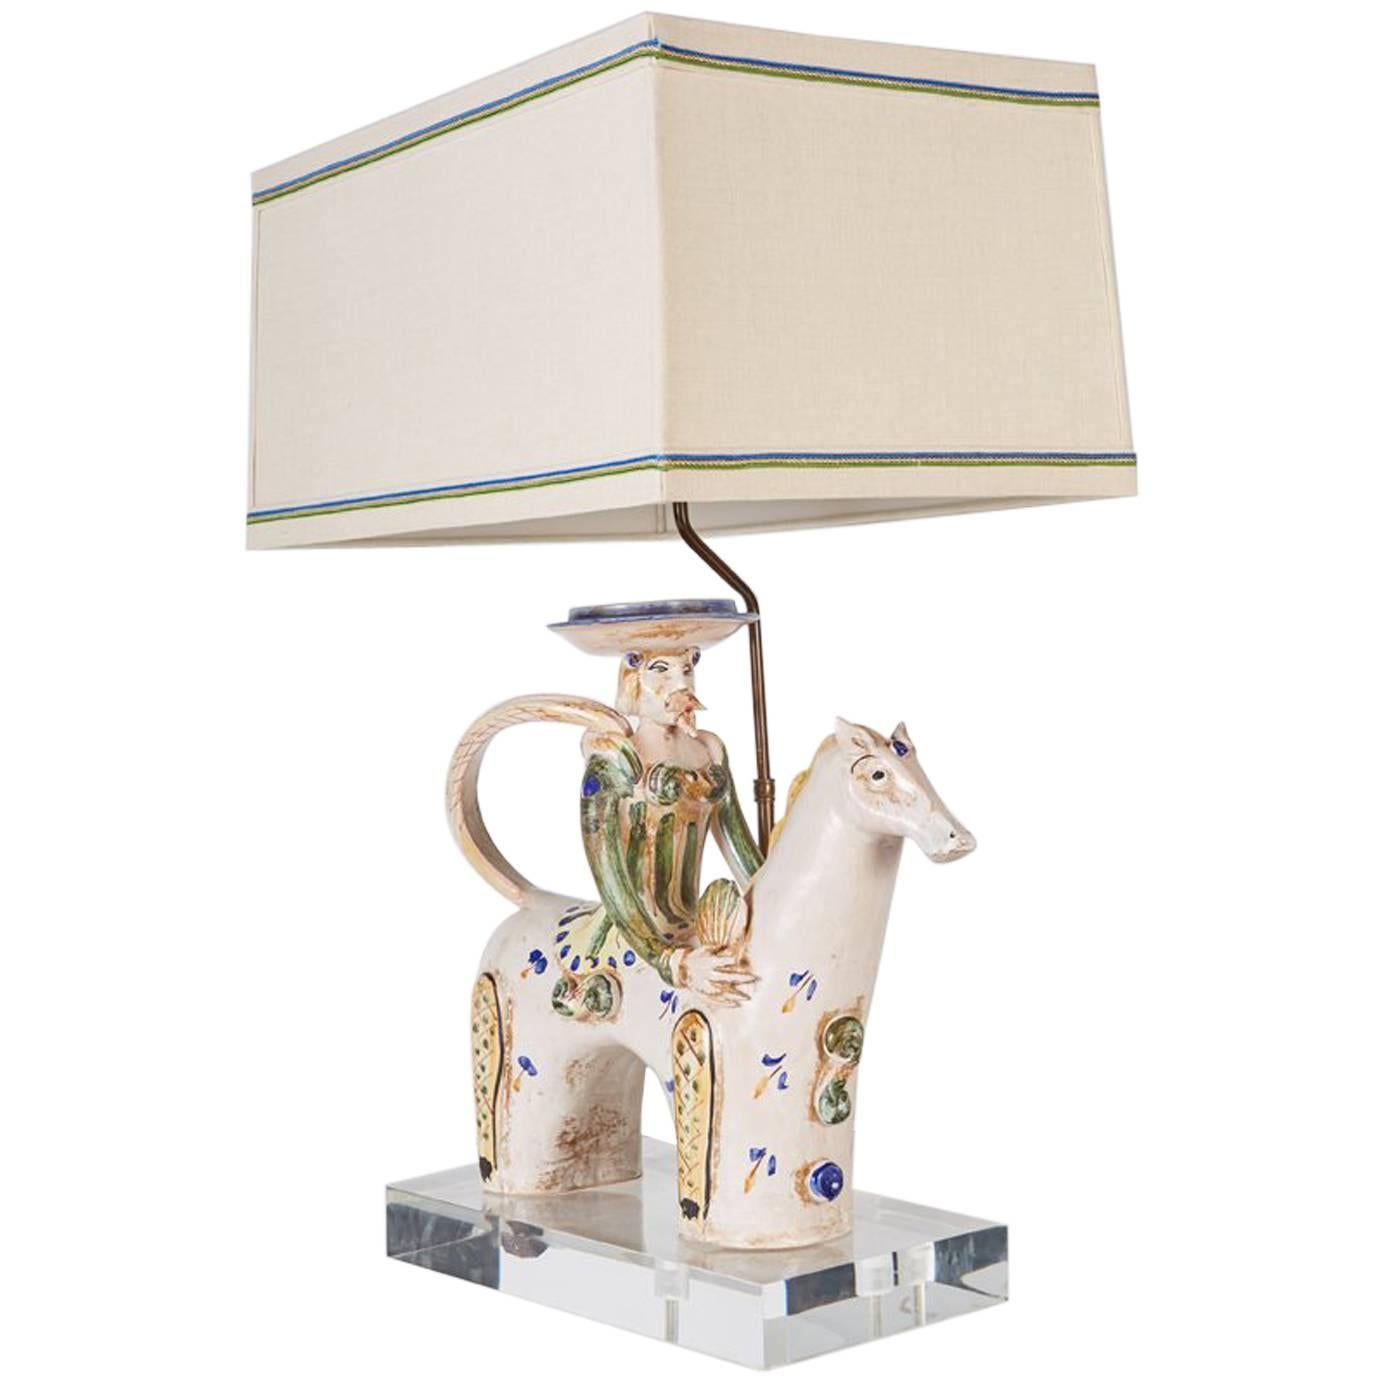 Italian Midcentury Ceramic Horse with Rider Now Custom Mounted as a Lamp